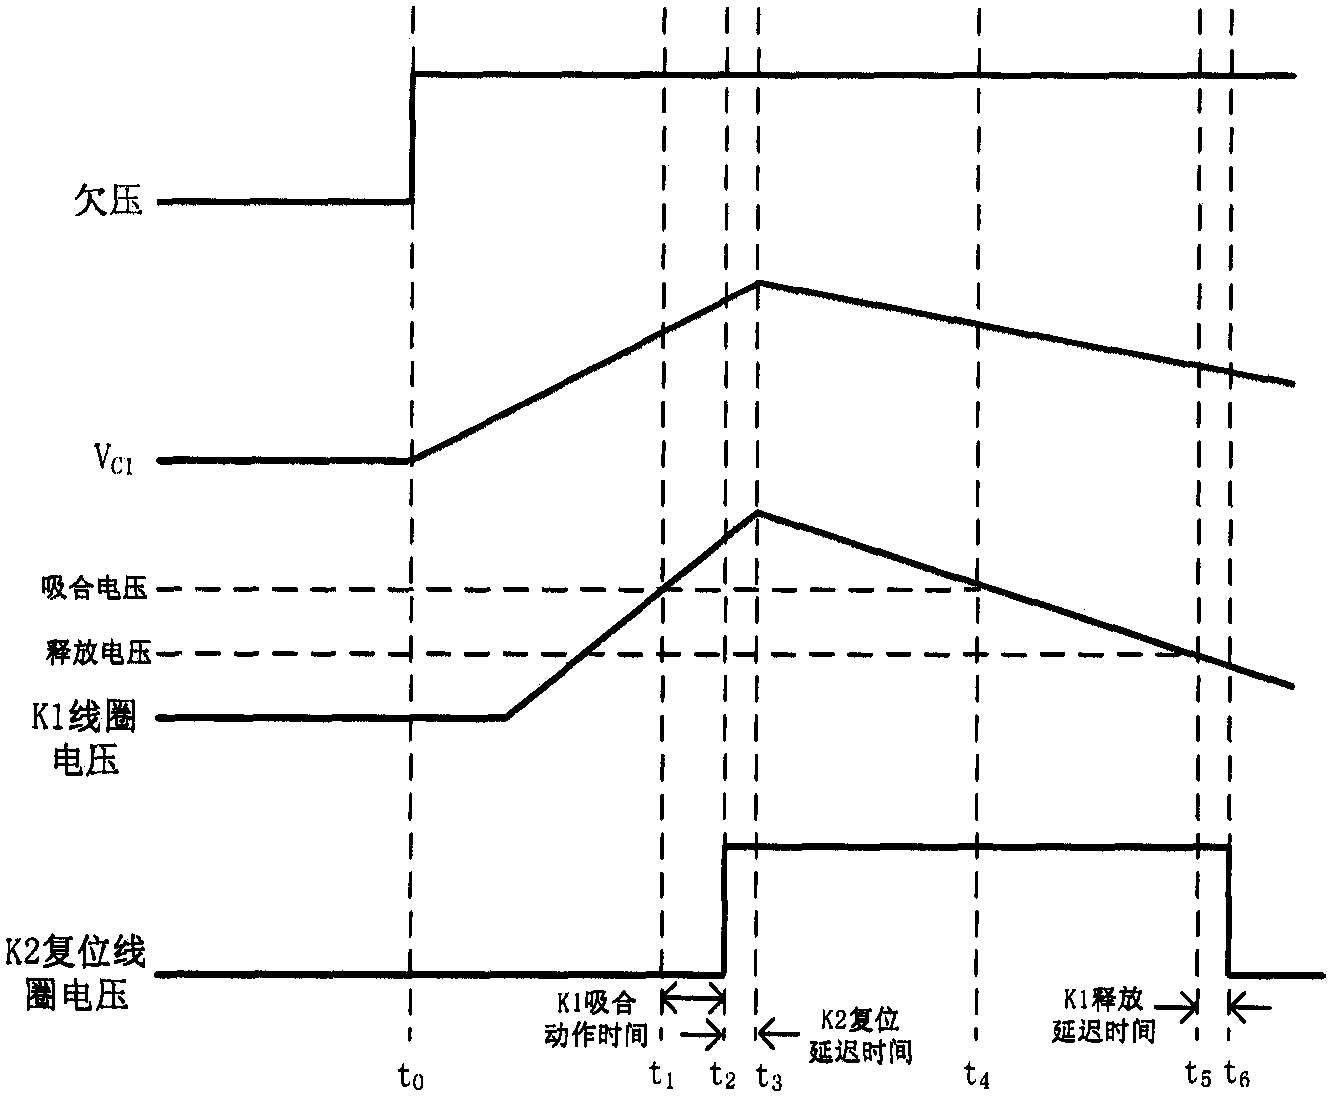 A satellite load power supply undervoltage protection control circuit